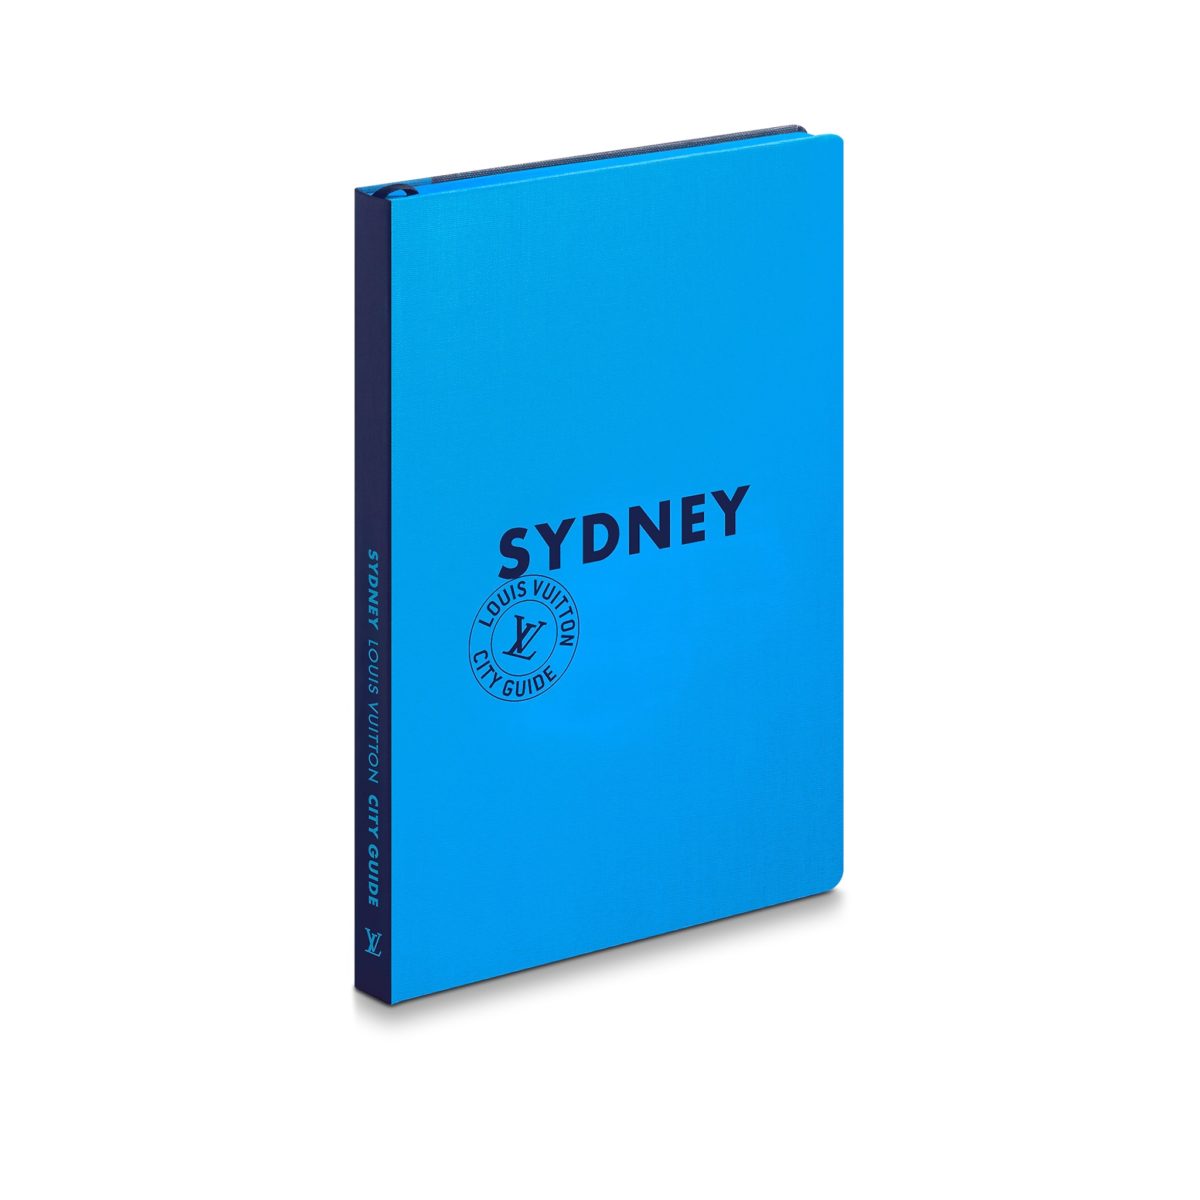 louis vuitton sydney city guide english version books and writing R08784 PM2 Front view 1